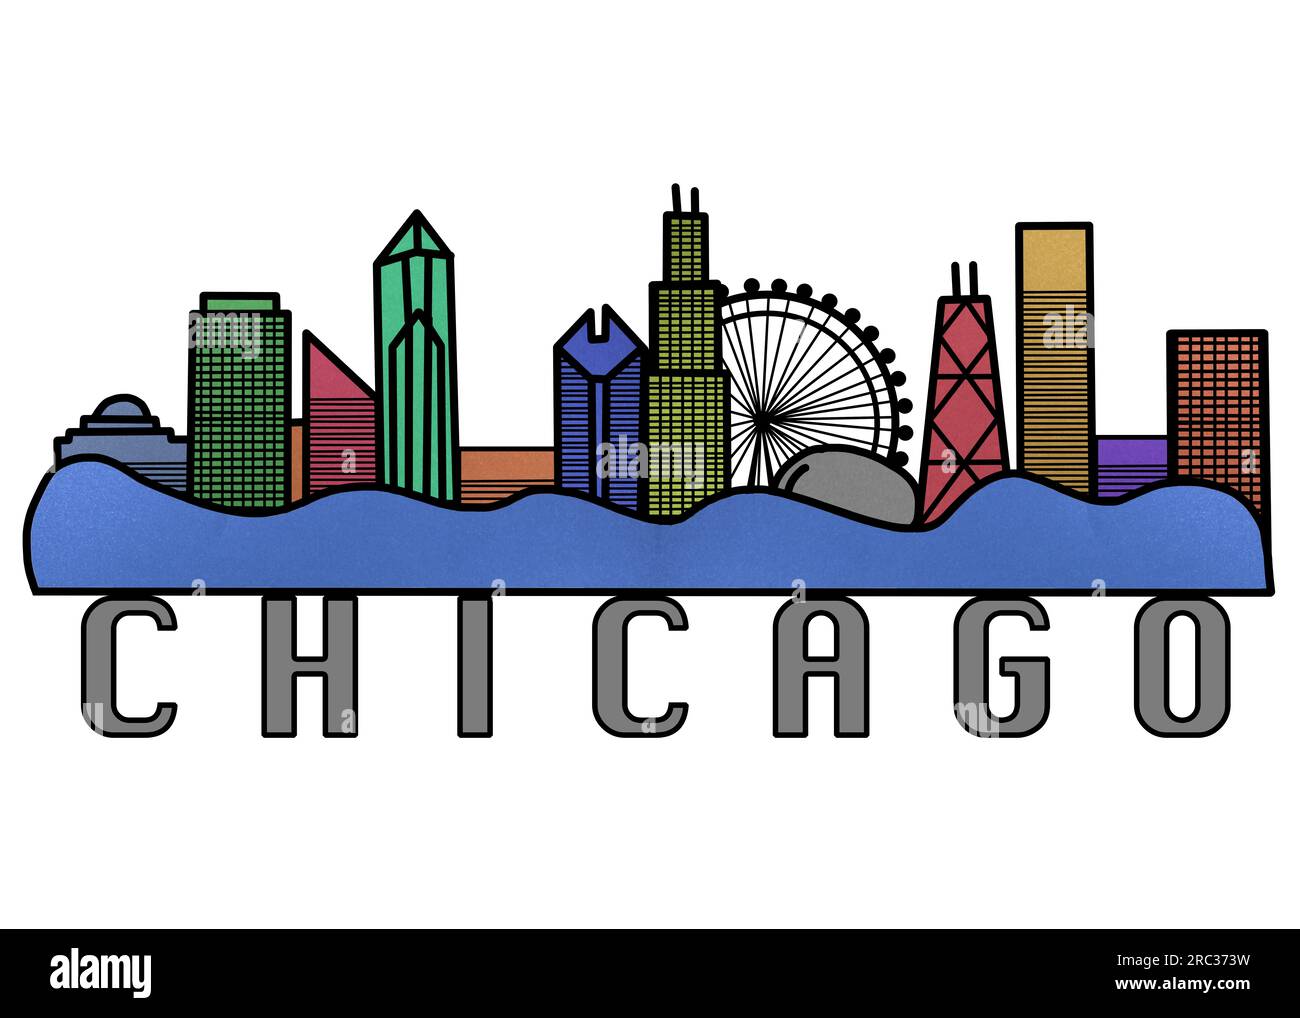 Chicago Skyline Colorful Horizontal Illustration, Line Art Silhouette of Chicago Illinois, USA Cityscape Drawing Banner Stock Photo